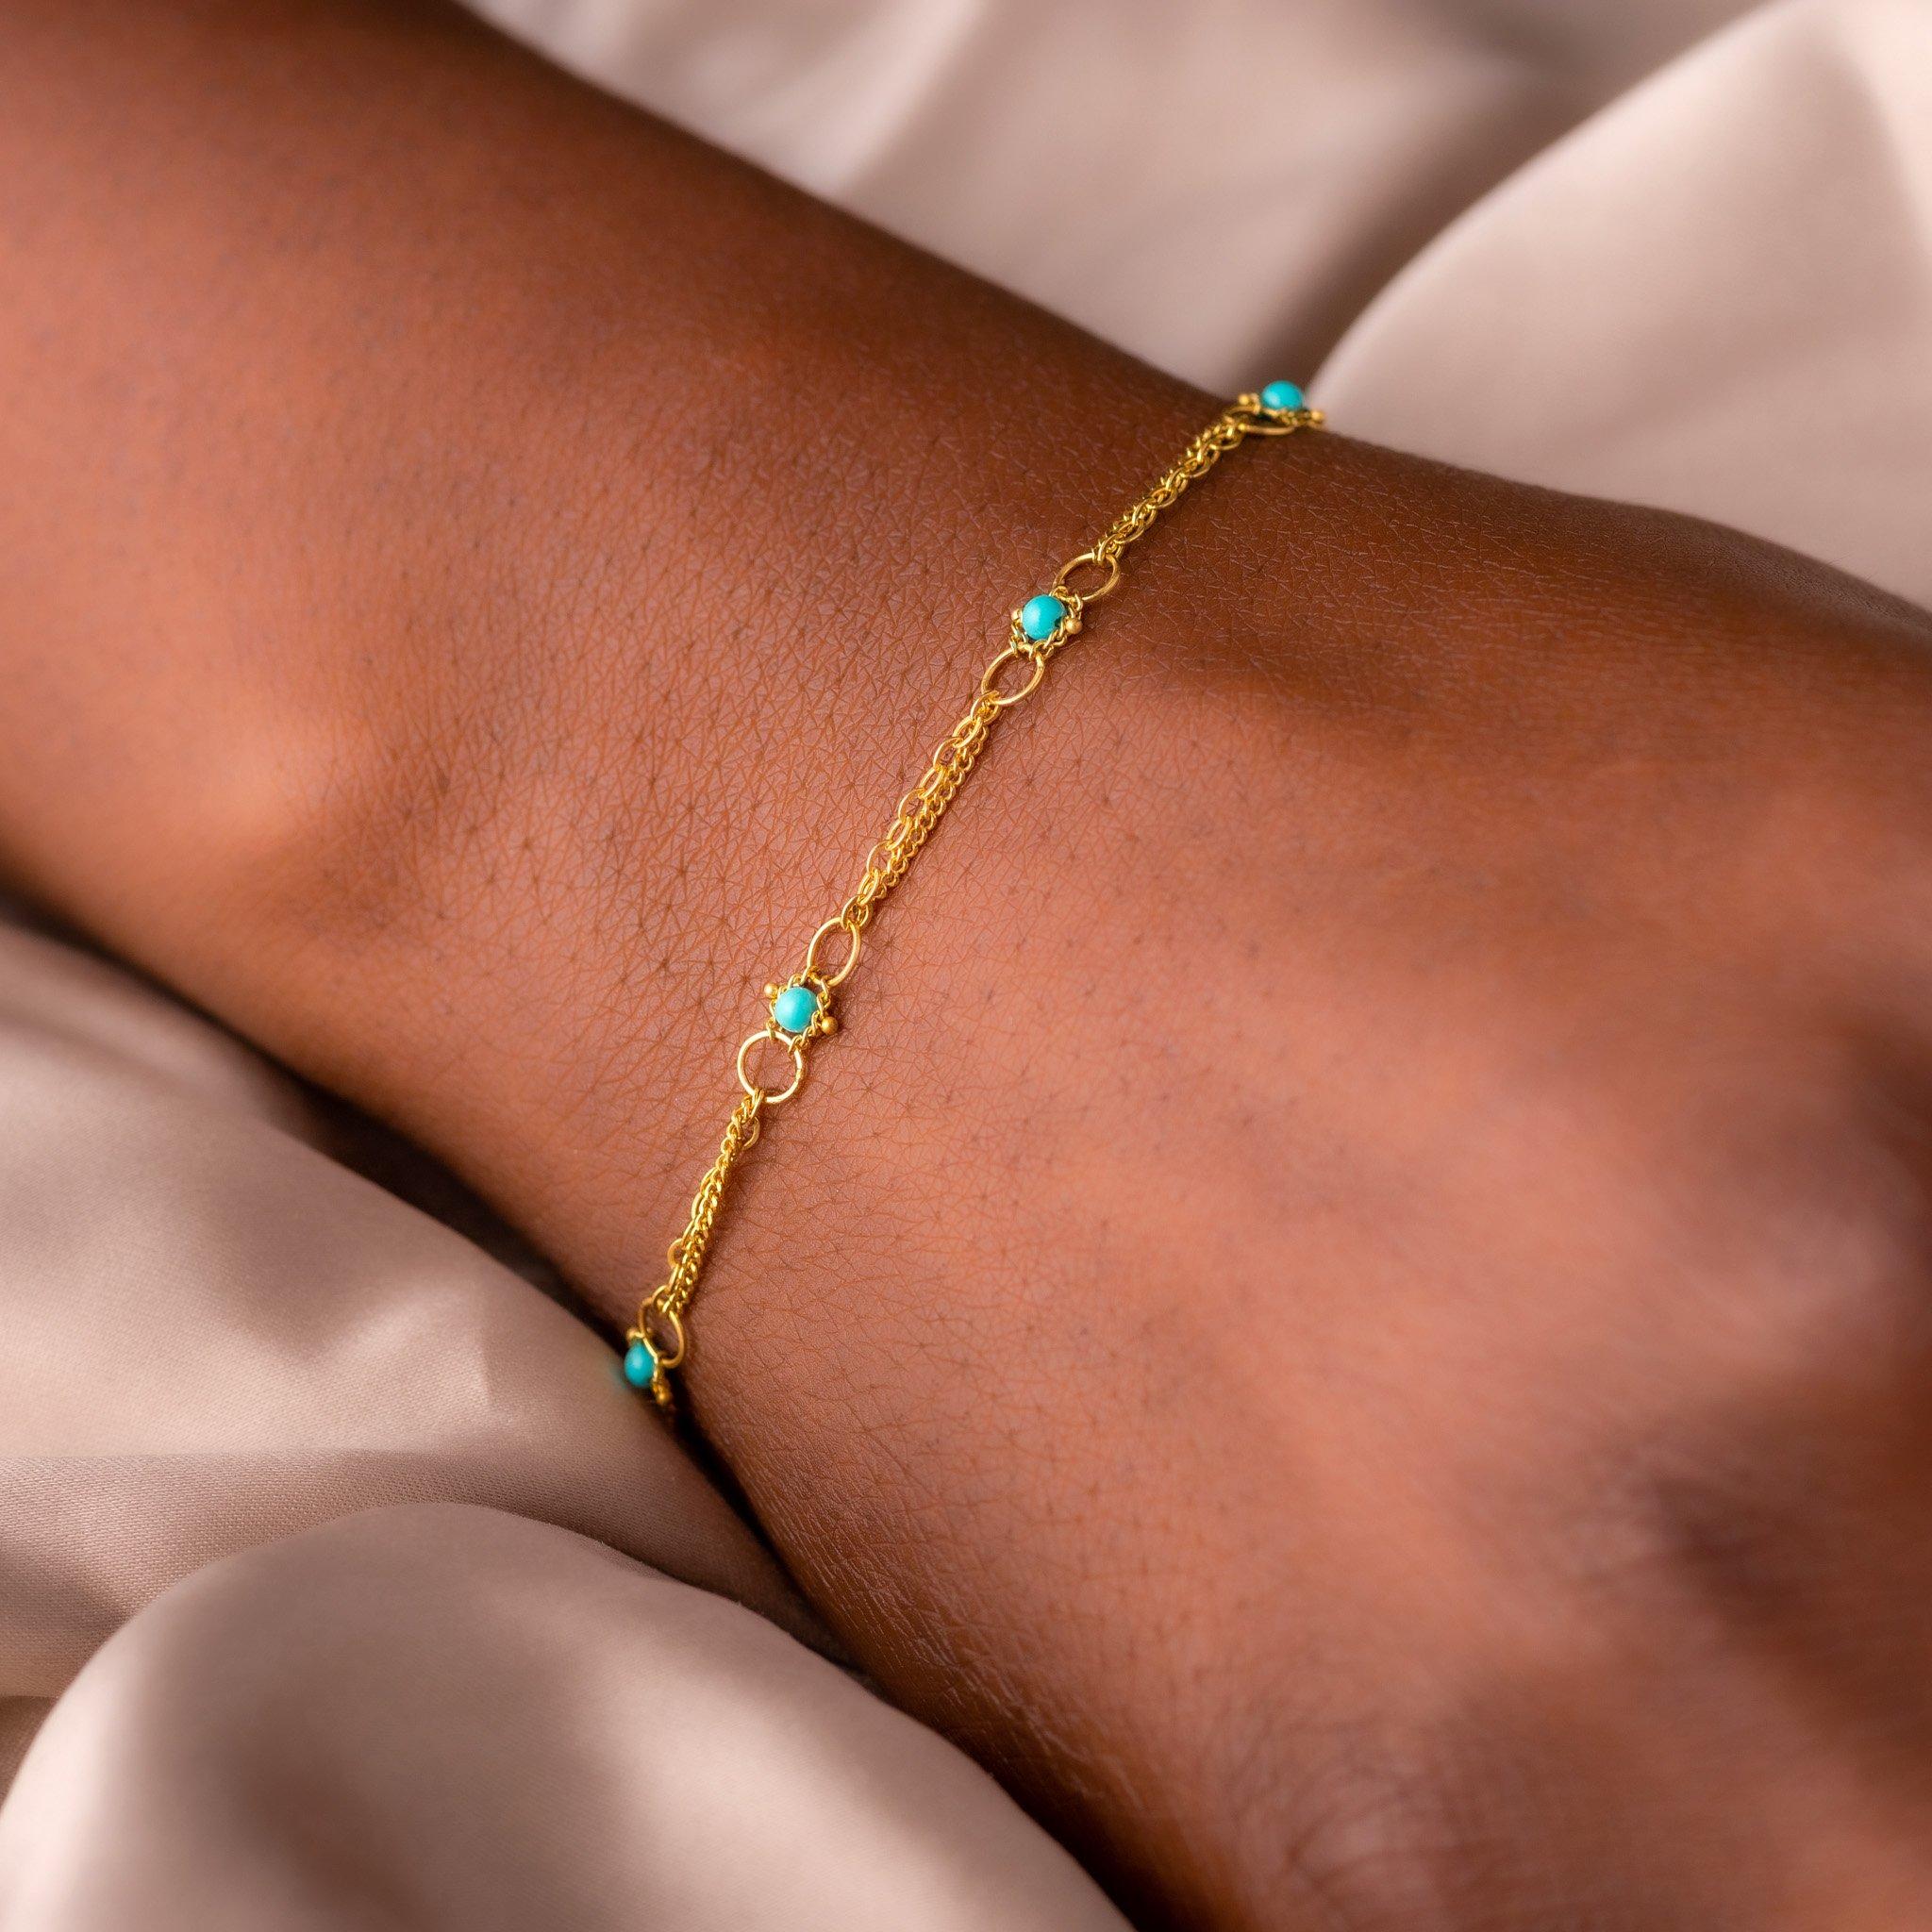 Delicate 18K yellow gold chain encircles the wrist like strands of sunlight, punctuated at intervals by round Turquoise beads of a perfect robin’s egg blue. The links of the meticulously hand-woven chains form tiny, intricate patterns that draw the